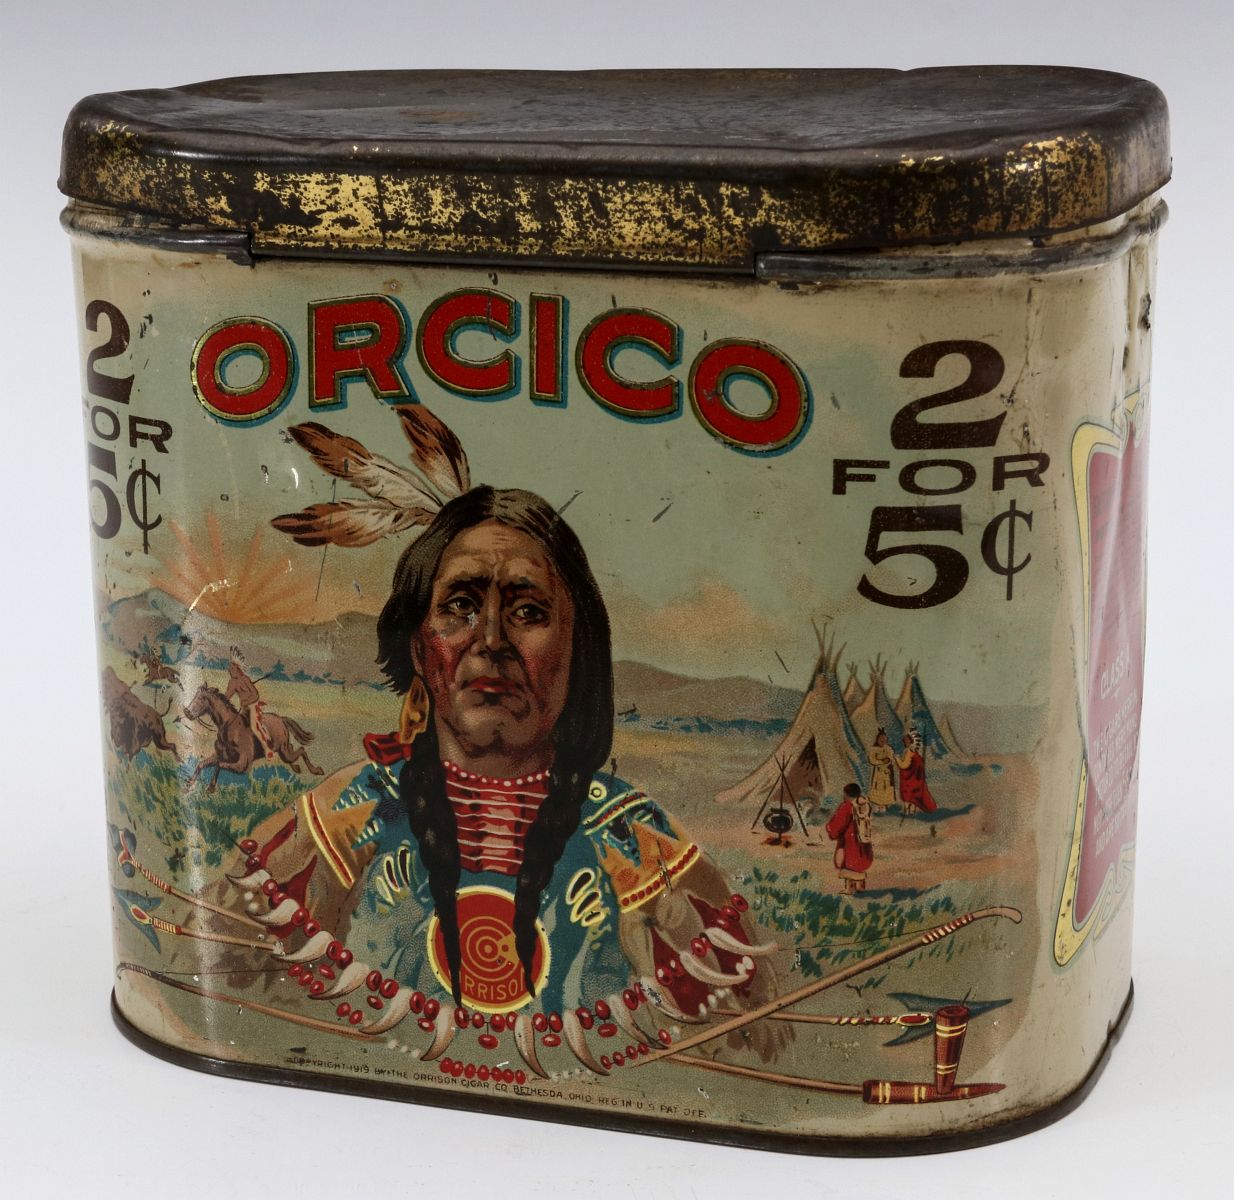 AN ORCICO 5Â¢ CIGAR TIN WITH INDIANS DATED 1919